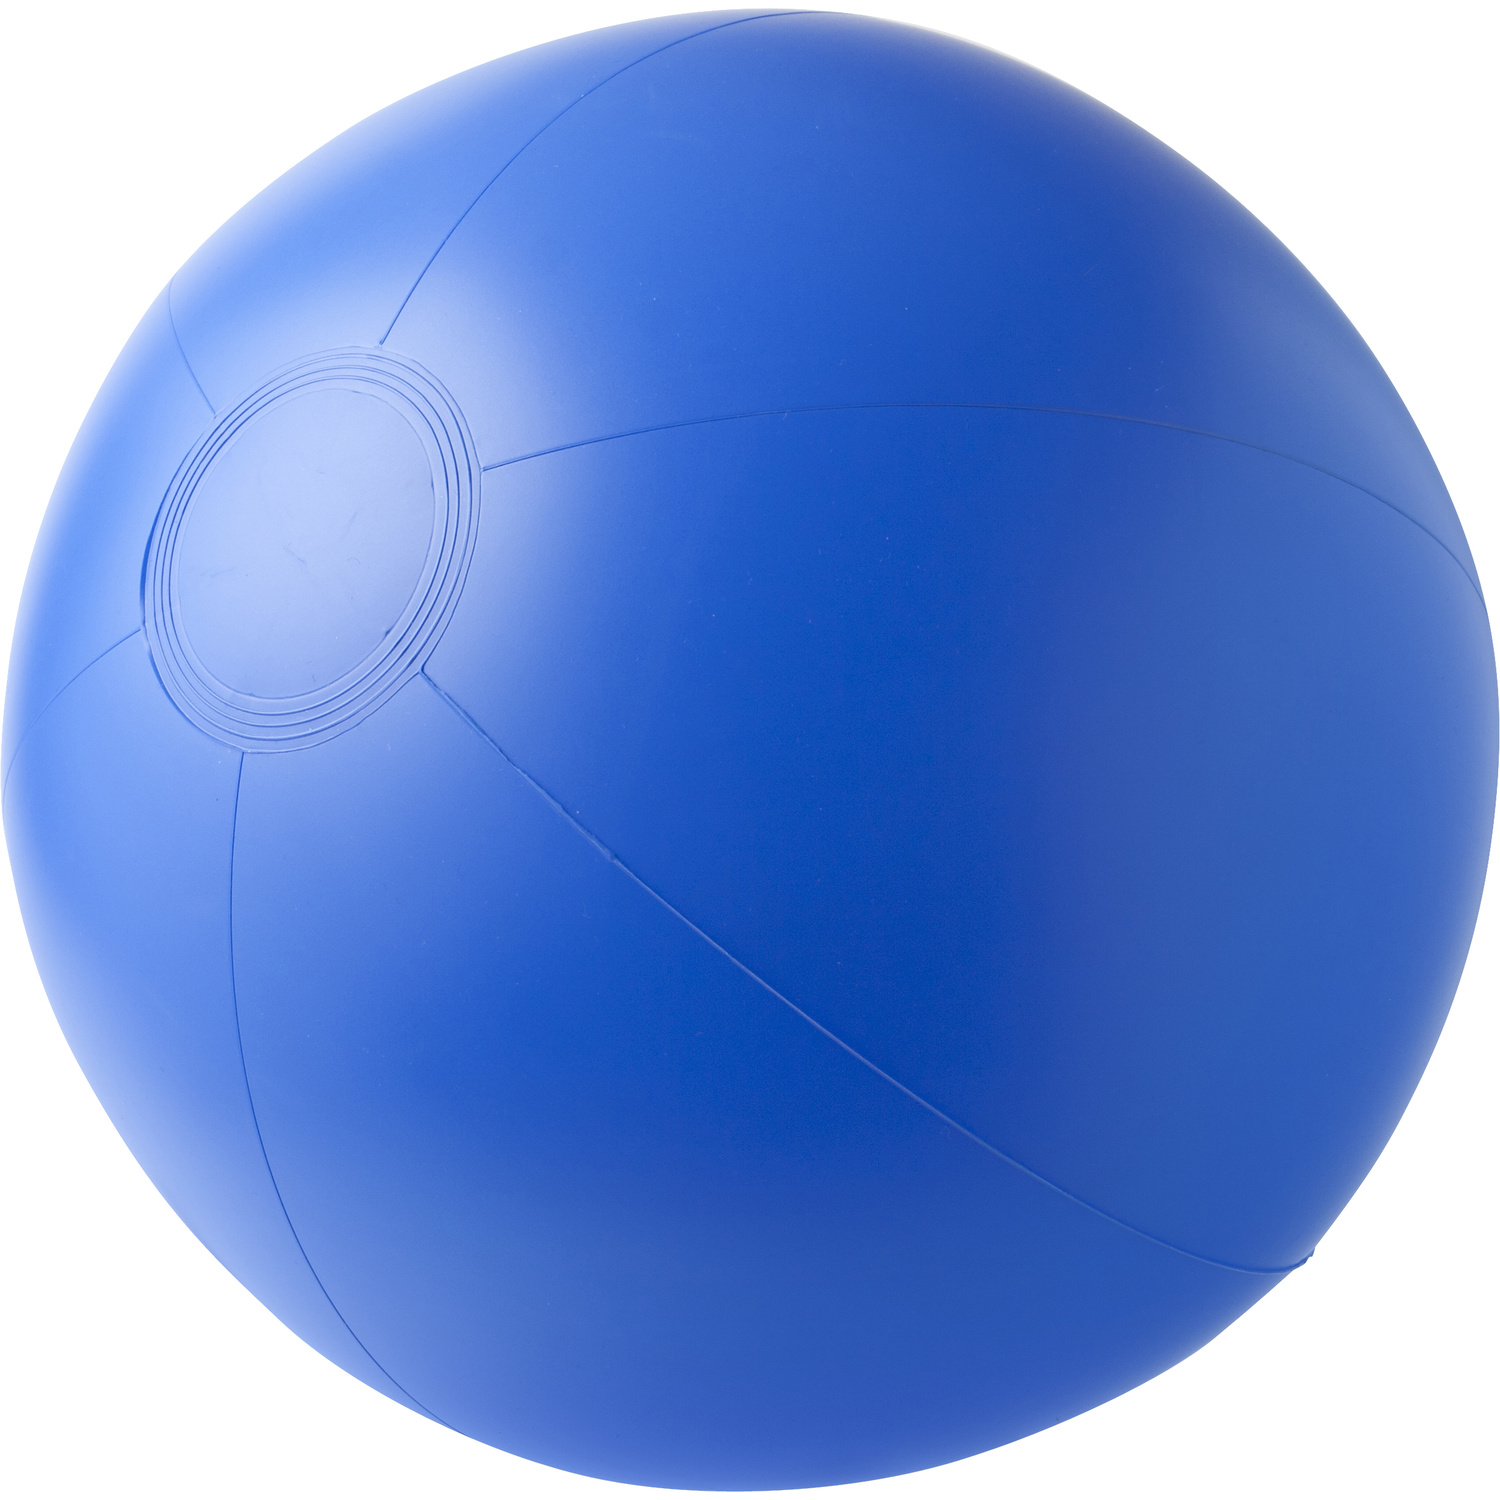 004188 005999999 3d045 rgt pro01 fal - Inflatable beach ball